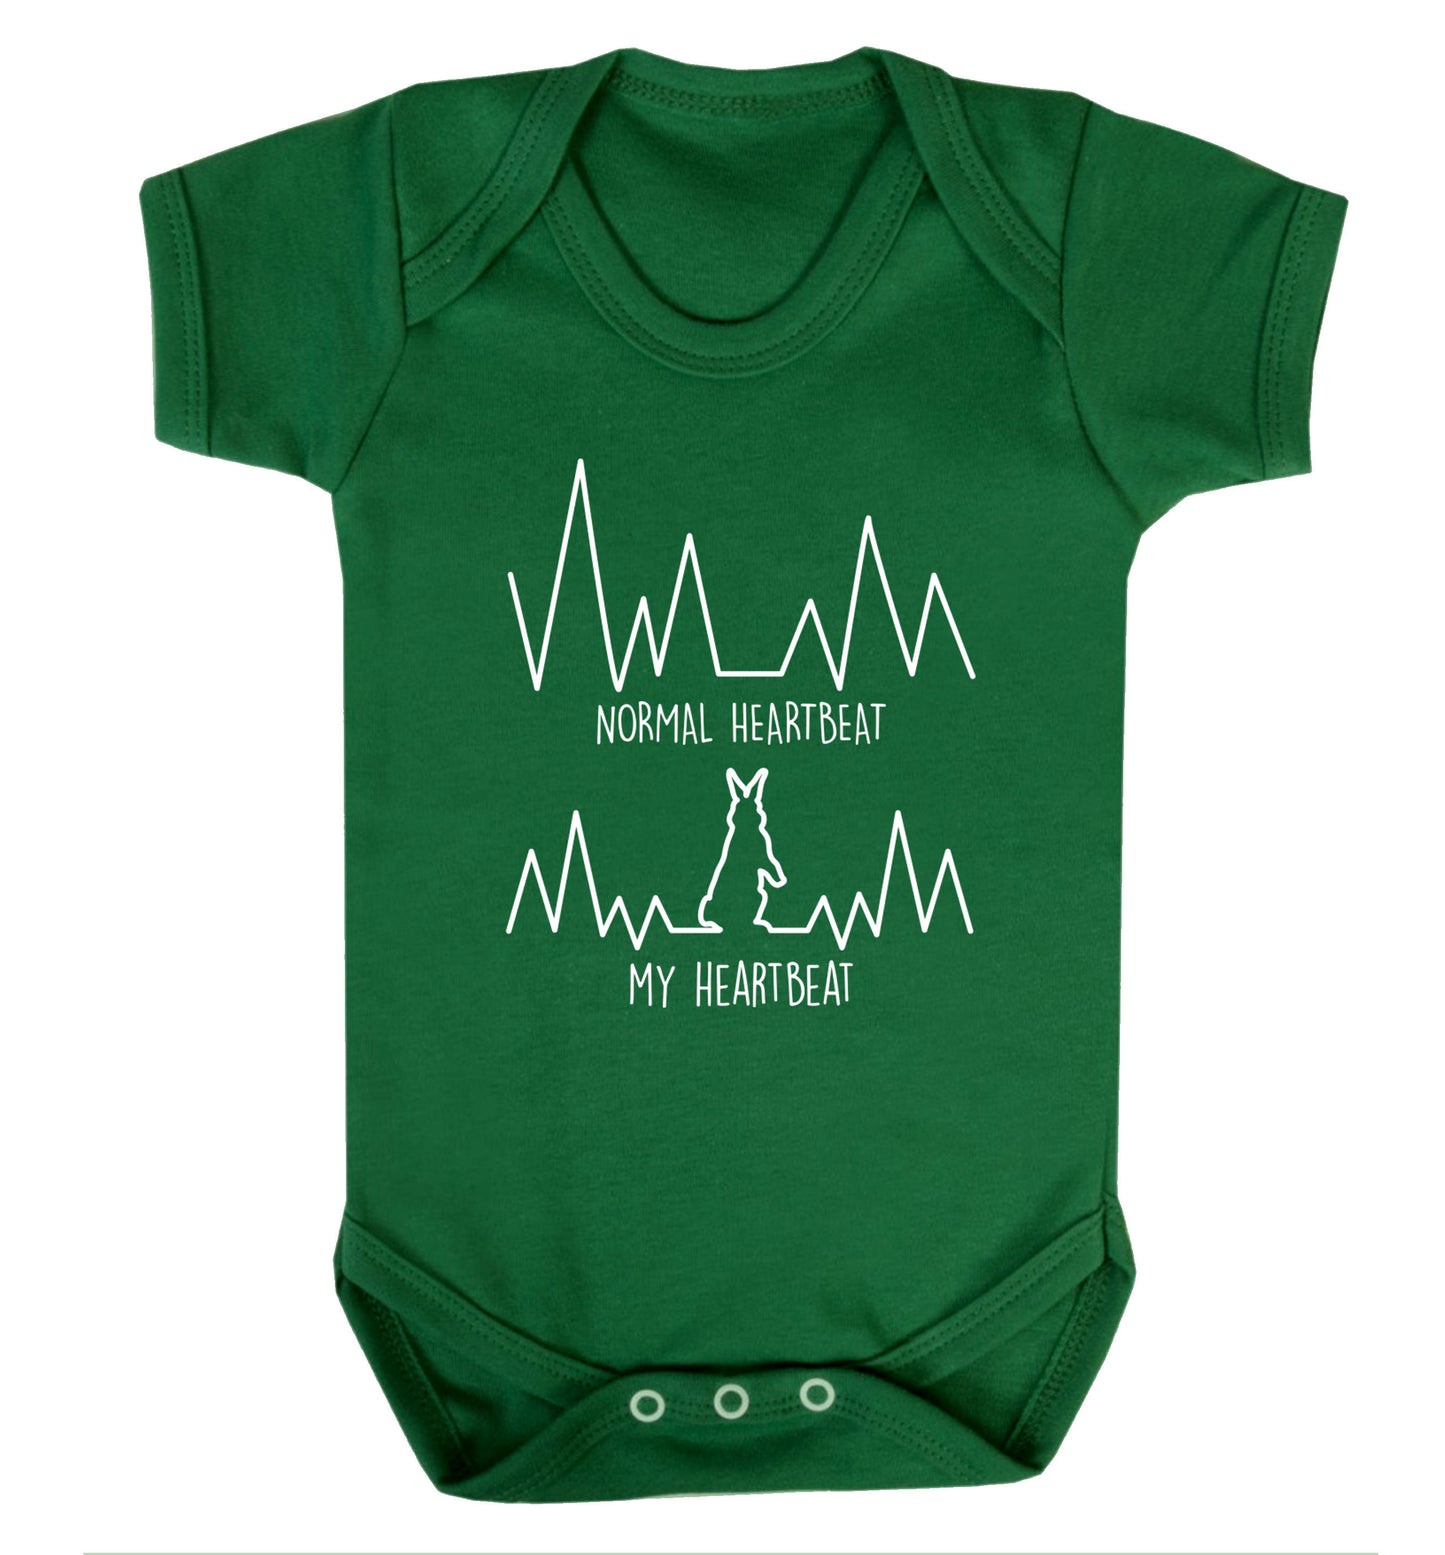 Normal heartbeat, my heartbeat rabbit lover Baby Vest green 18-24 months